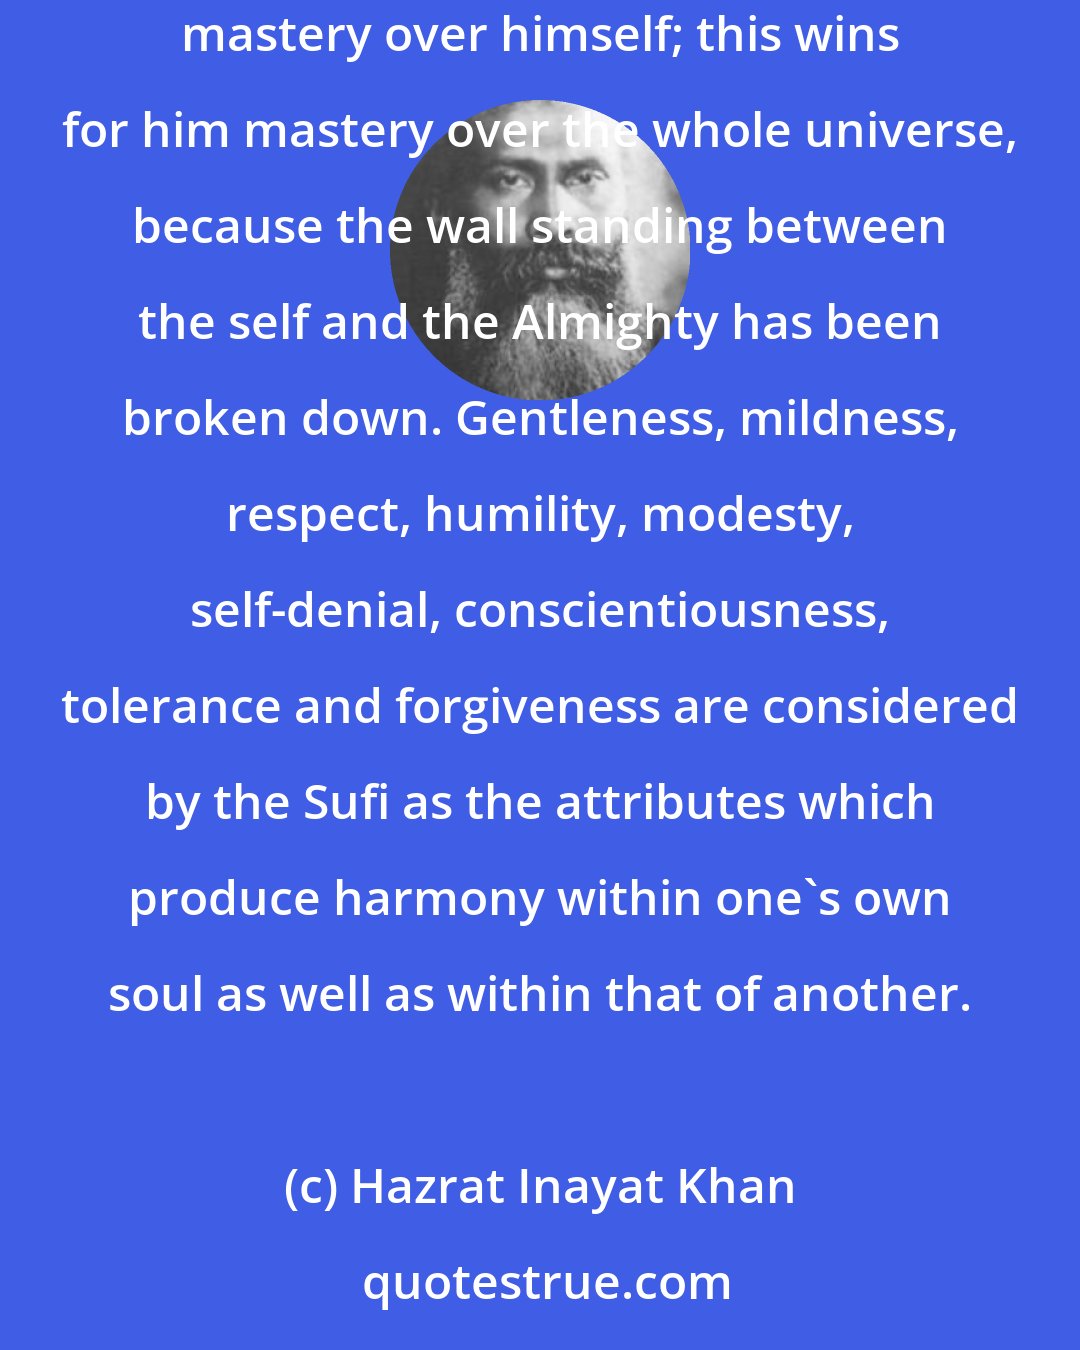 Hazrat Inayat Khan: His constant fight is with the Nafs (self-interest), the root of all disharmony and the only enemy of man. By crushing this enemy man gains mastery over himself; this wins for him mastery over the whole universe, because the wall standing between the self and the Almighty has been broken down. Gentleness, mildness, respect, humility, modesty, self-denial, conscientiousness, tolerance and forgiveness are considered by the Sufi as the attributes which produce harmony within one's own soul as well as within that of another.